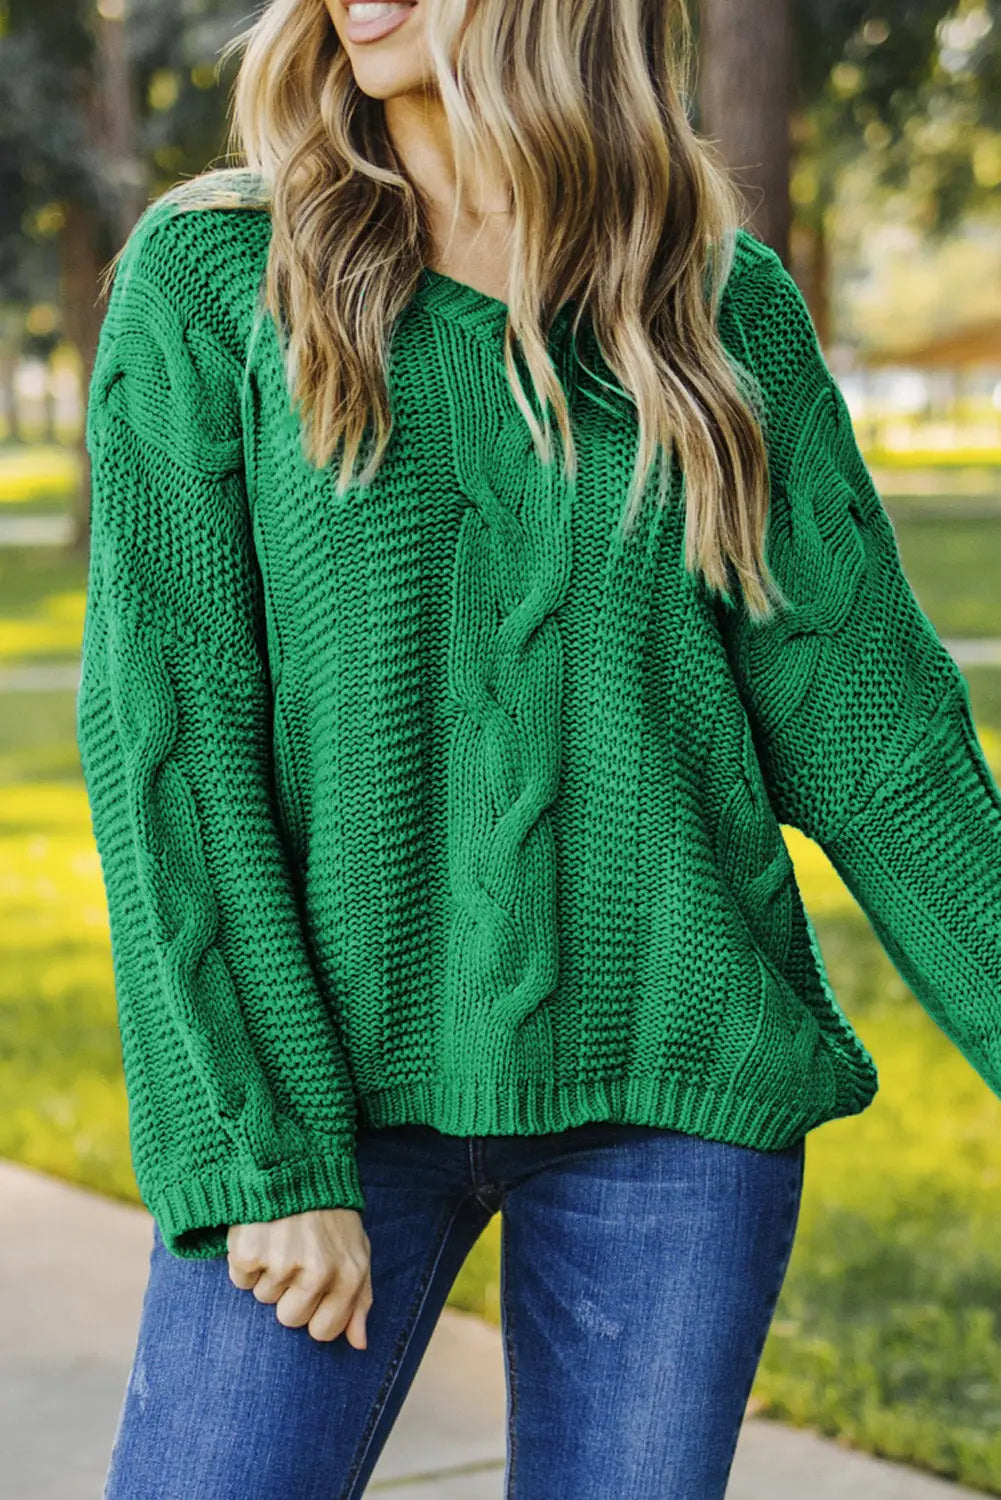 Green bubblegum v-neck braided knit sweater - s / 60% cotton + 40% acrylic - sweaters & cardigans